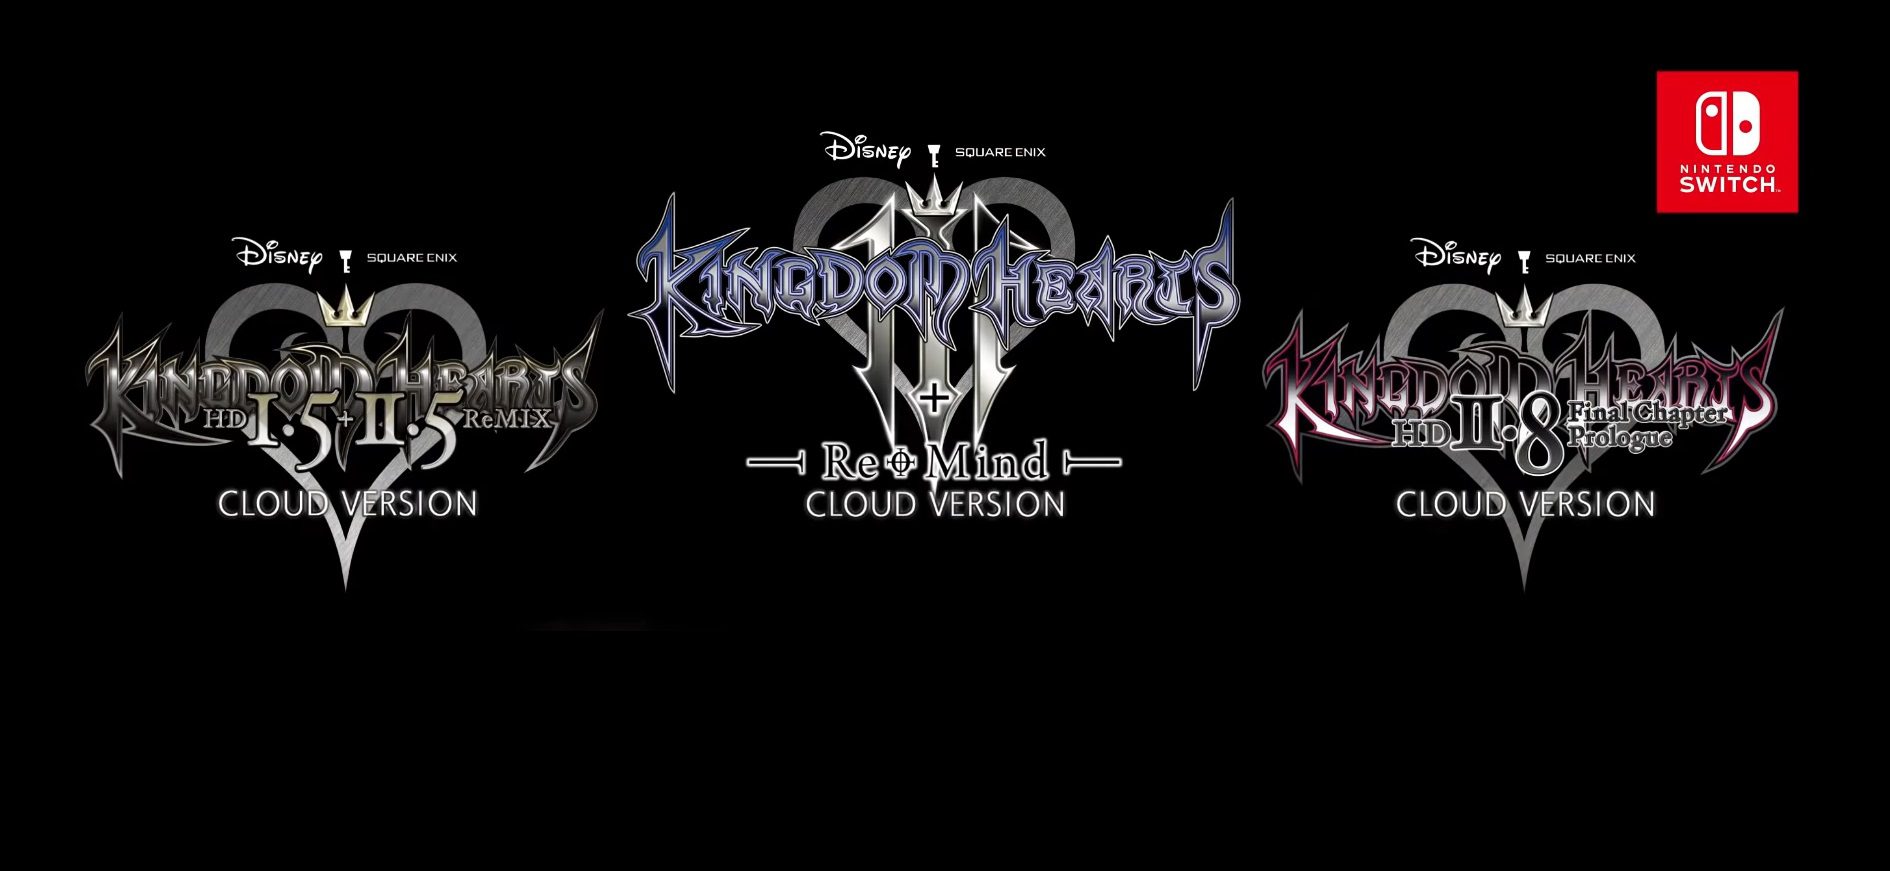 Kingdom Hearts is coming to Switch soon, but sadly in cloud form